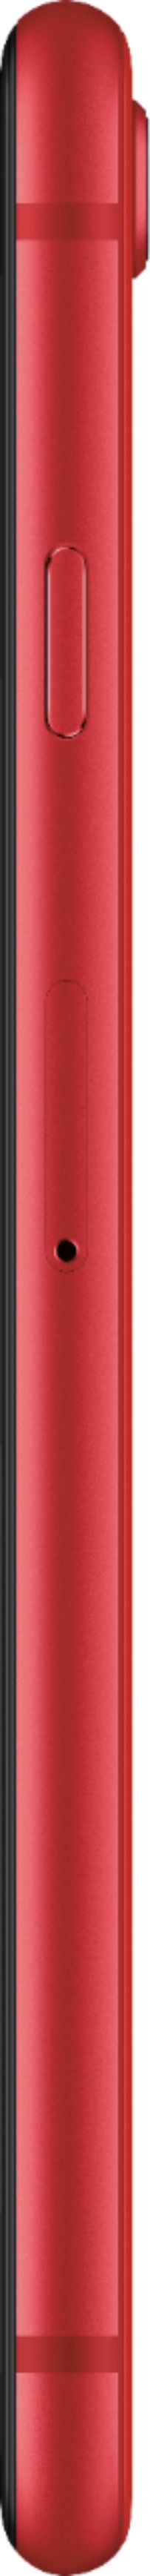 Best Buy: Apple iPhone 8 64GB (PRODUCT)RED™ Special Edition (AT&T 